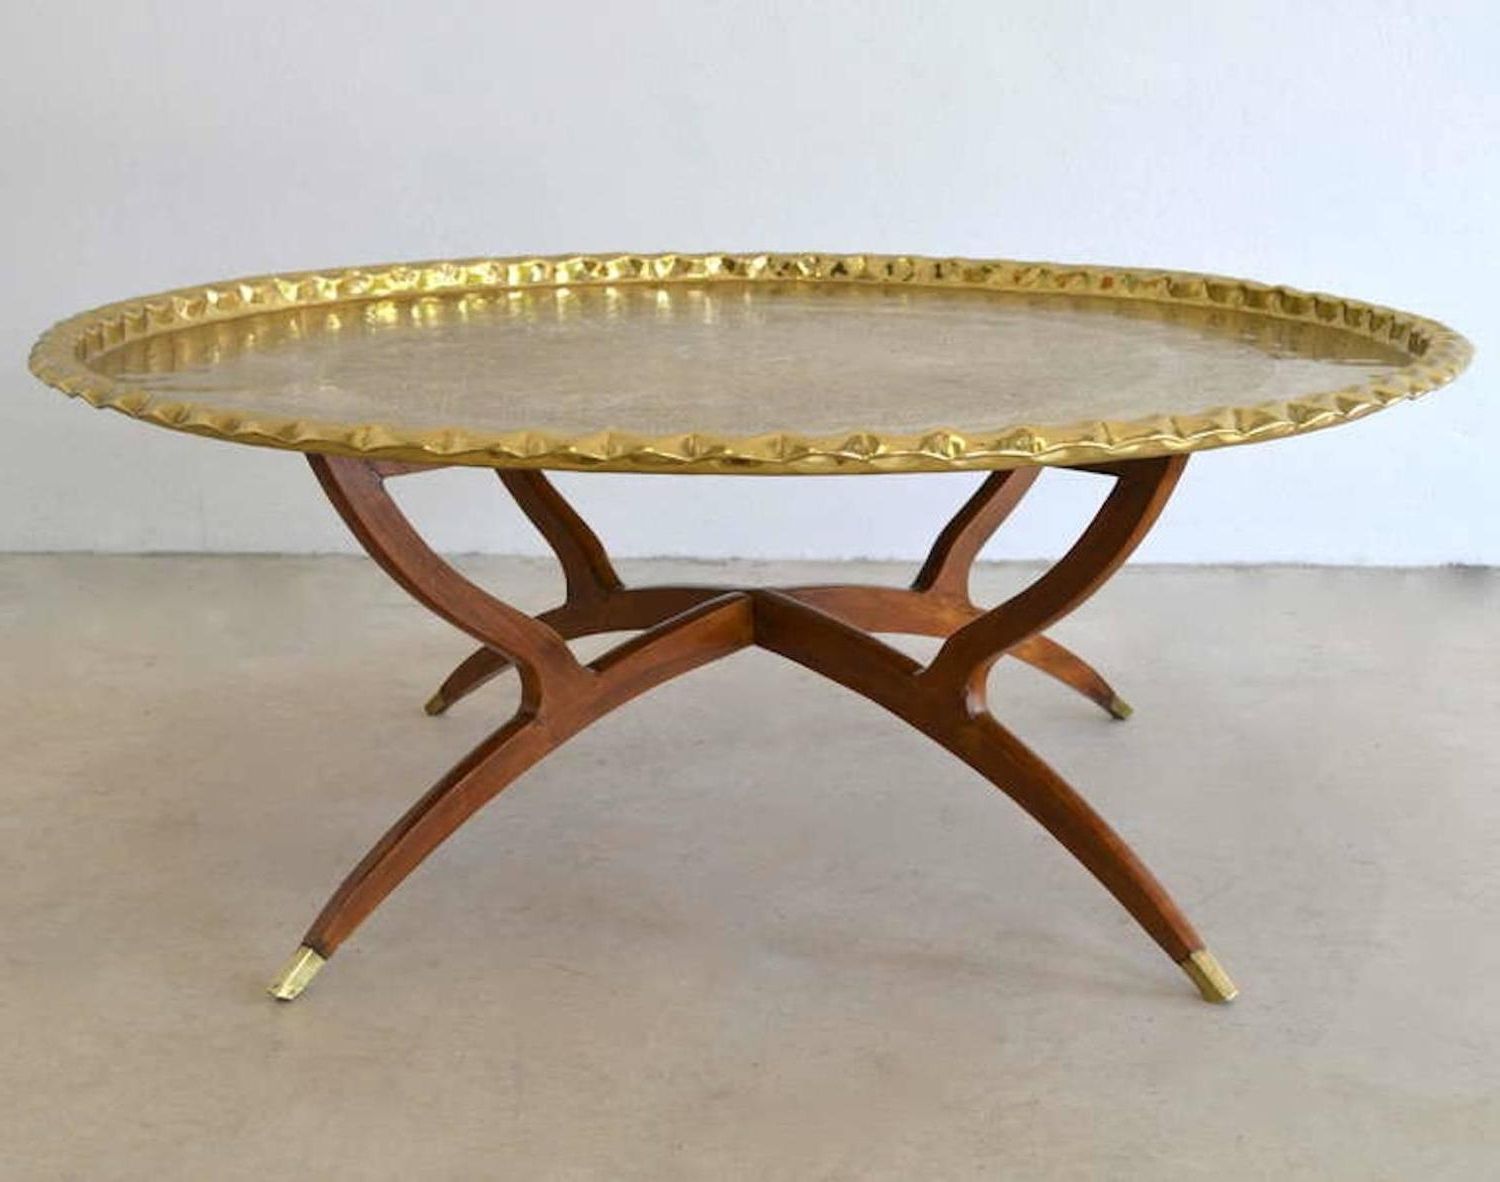 Most Recent Antique Brass Aluminum Round Coffee Tables Within Mid Century Round Brass Tray Top Coffee Table For Sale At (View 2 of 20)